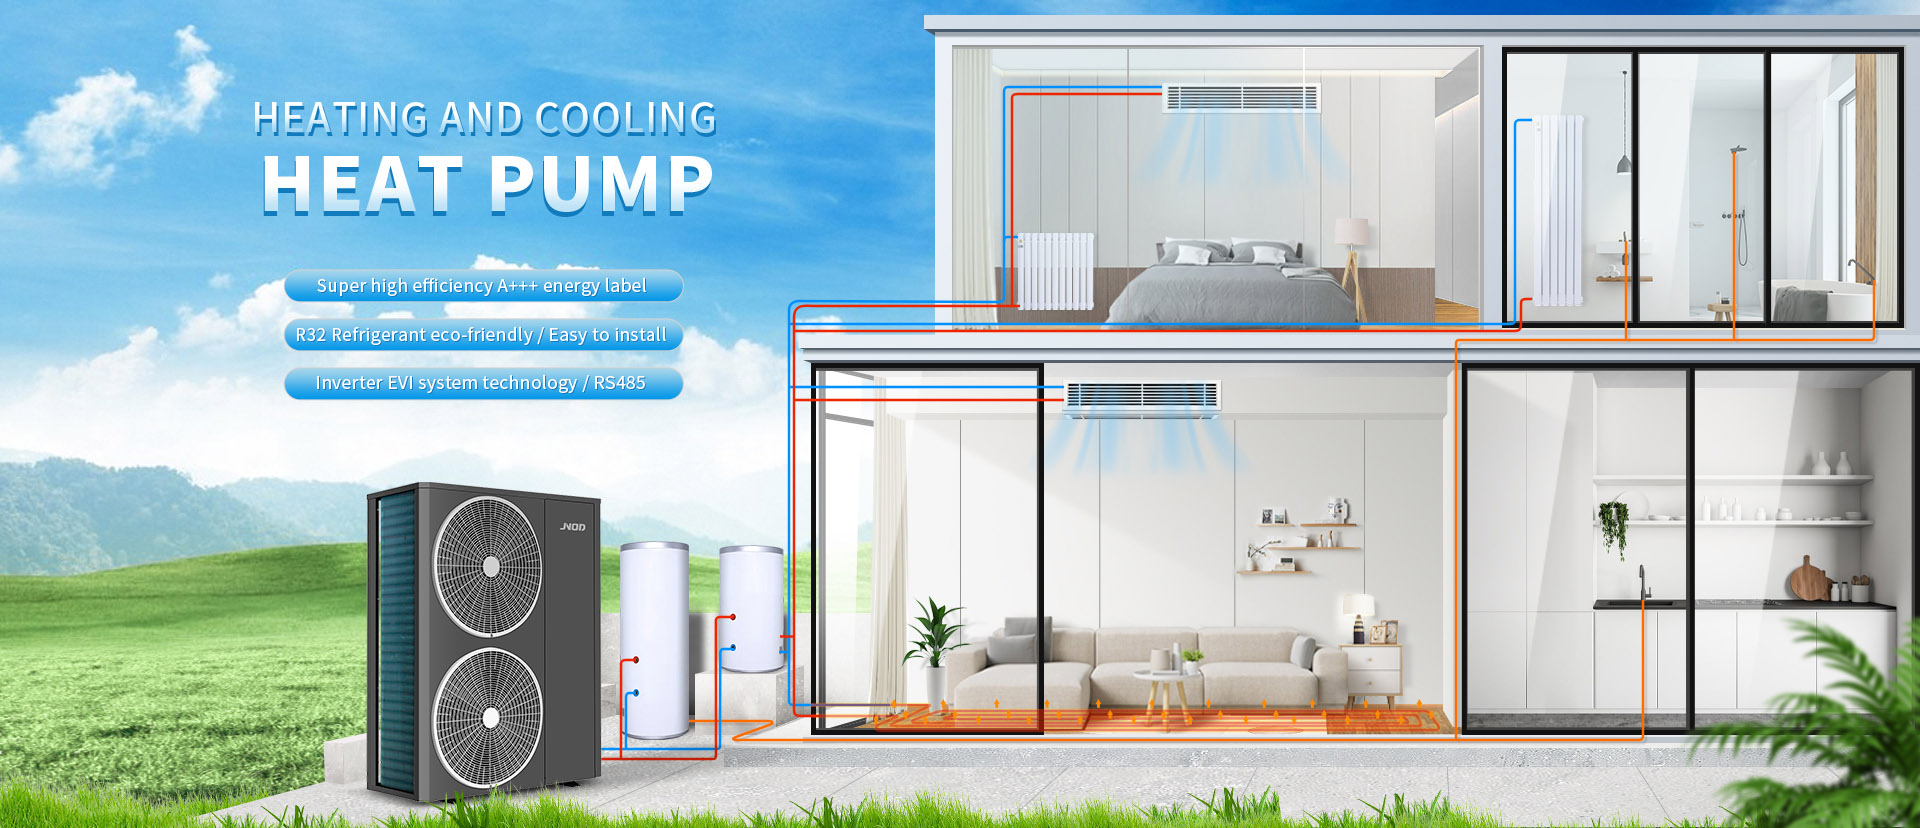 Air Cooled Air Heating And Cooling Heat Pump